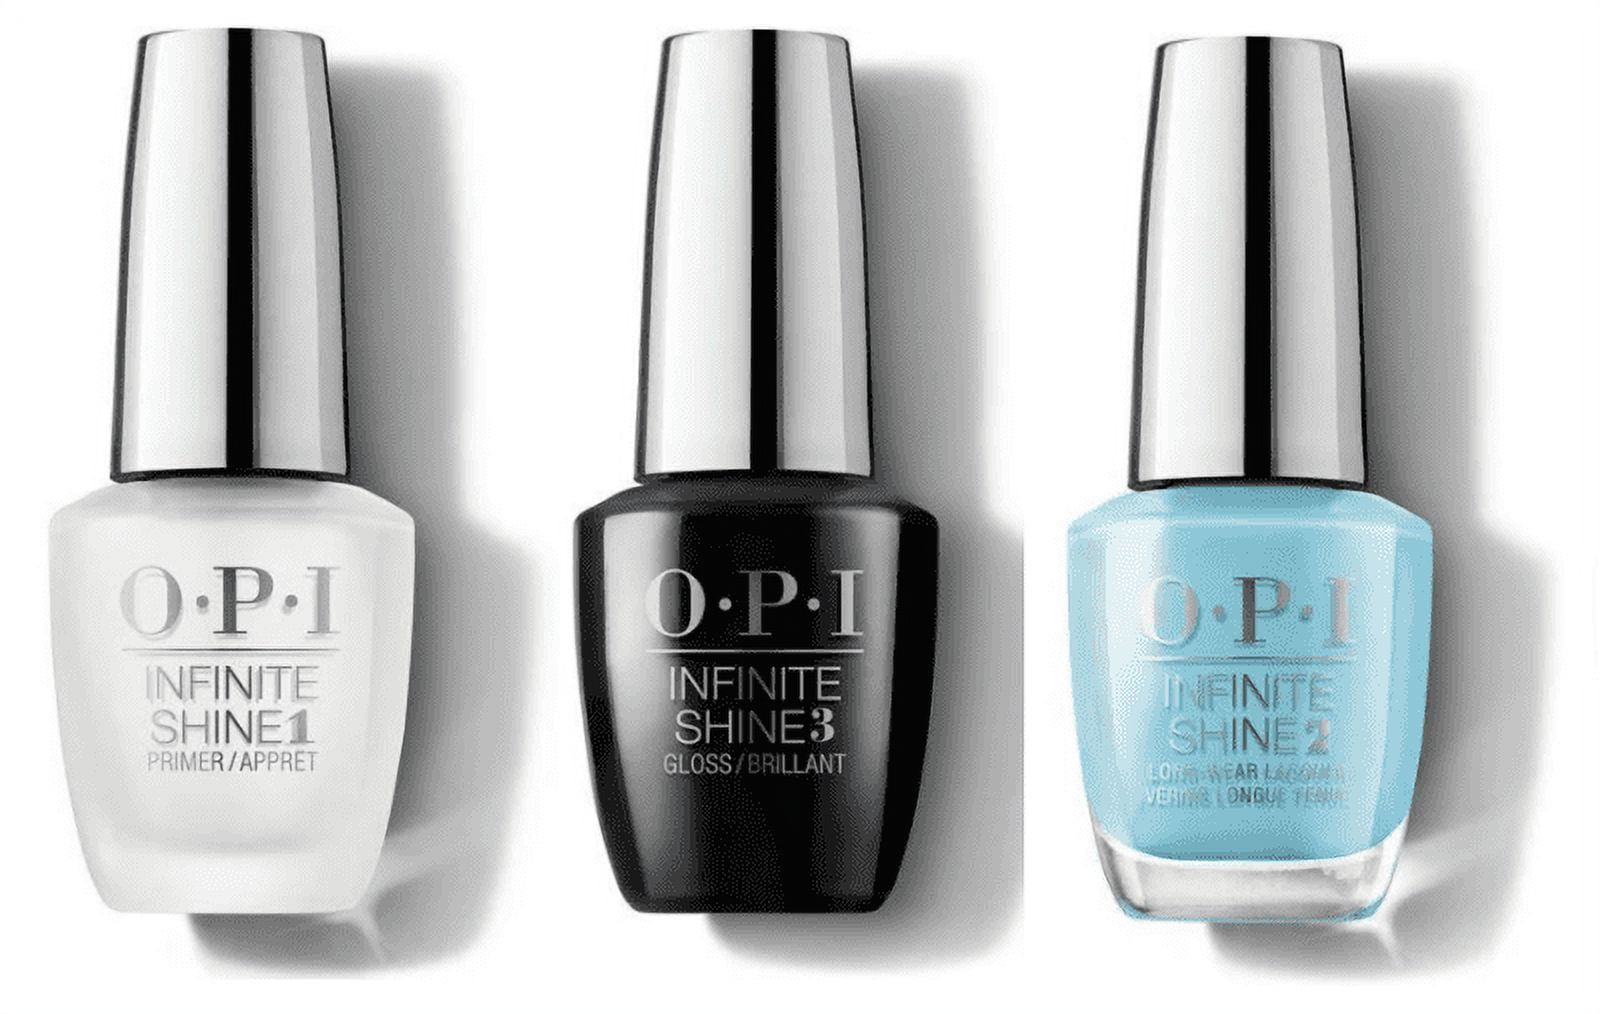 OPI Infinite Shine Nail Polish in "To Infinity & Blue-yond" - wide 3